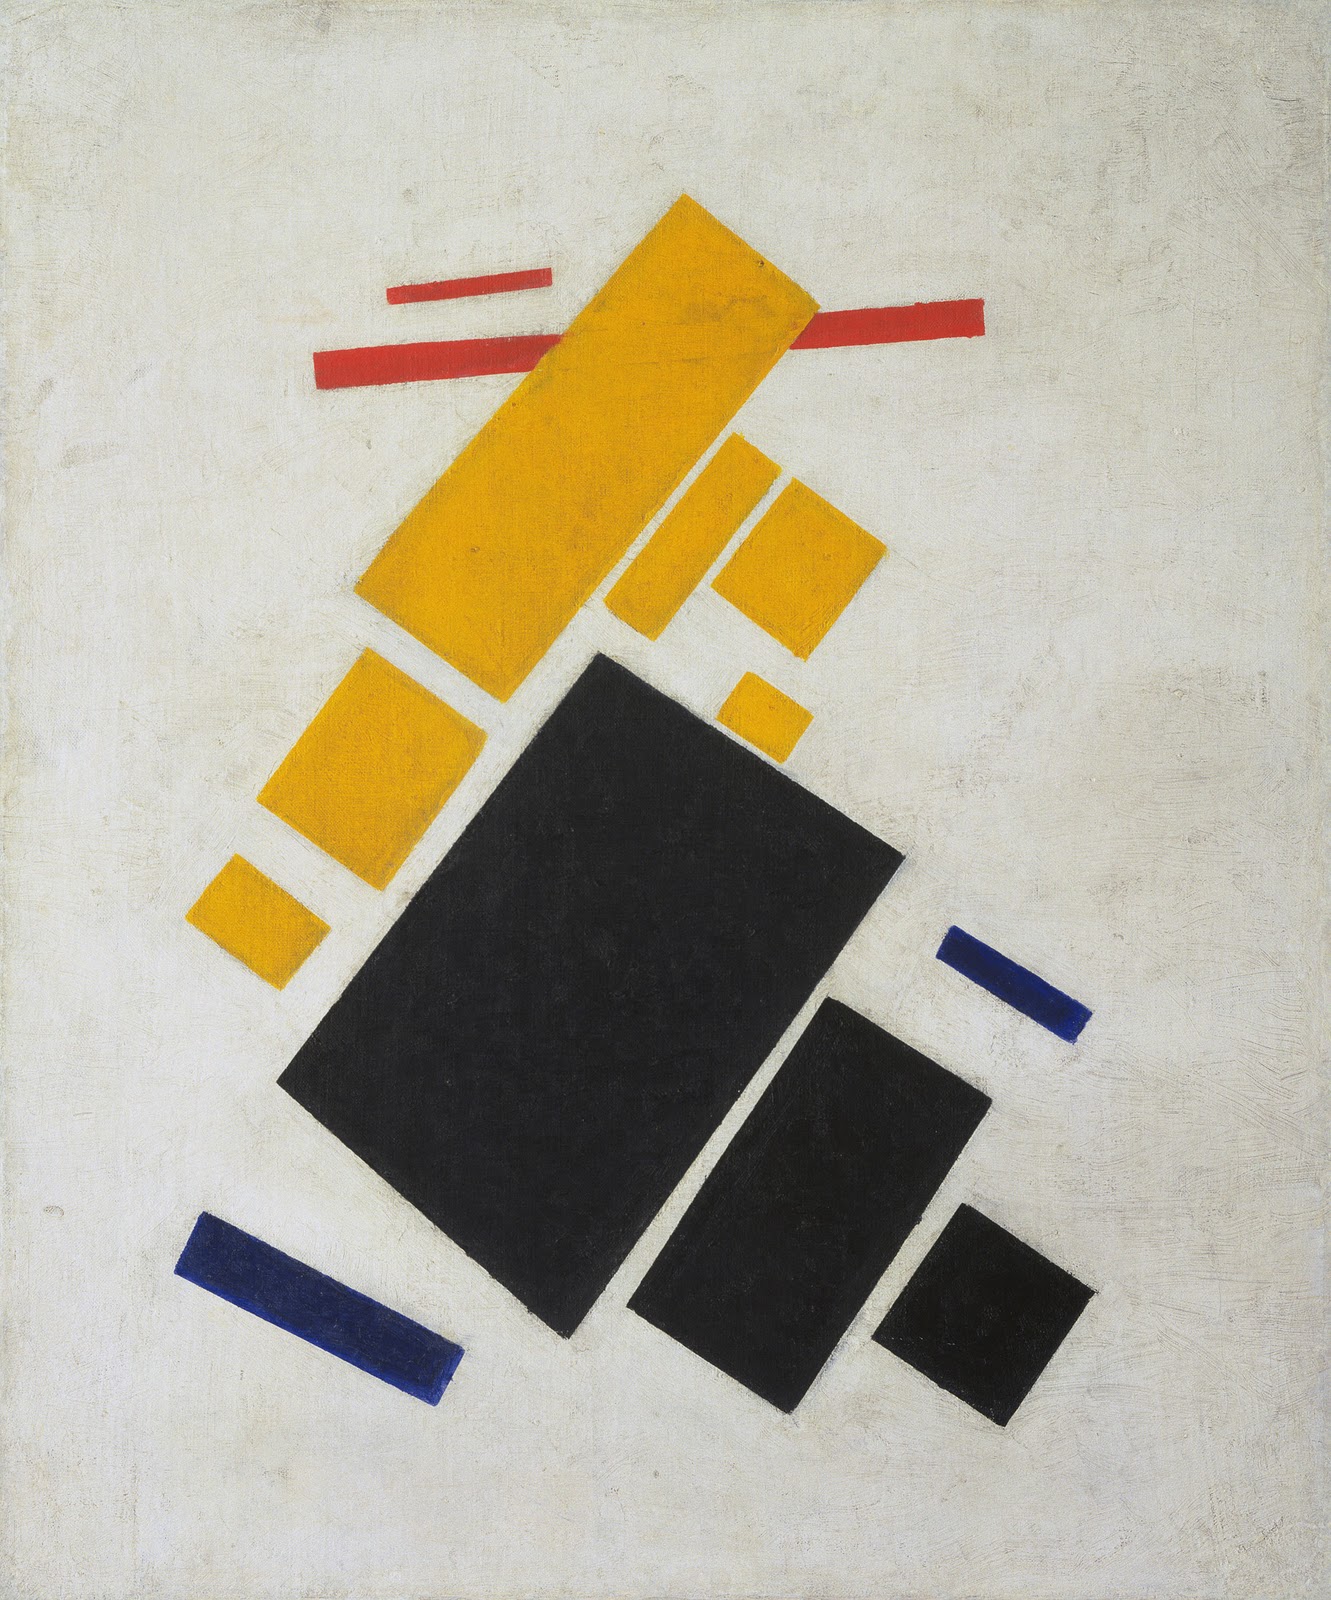 Suprematist Composition Airplane Flying by Kazimir Malevich